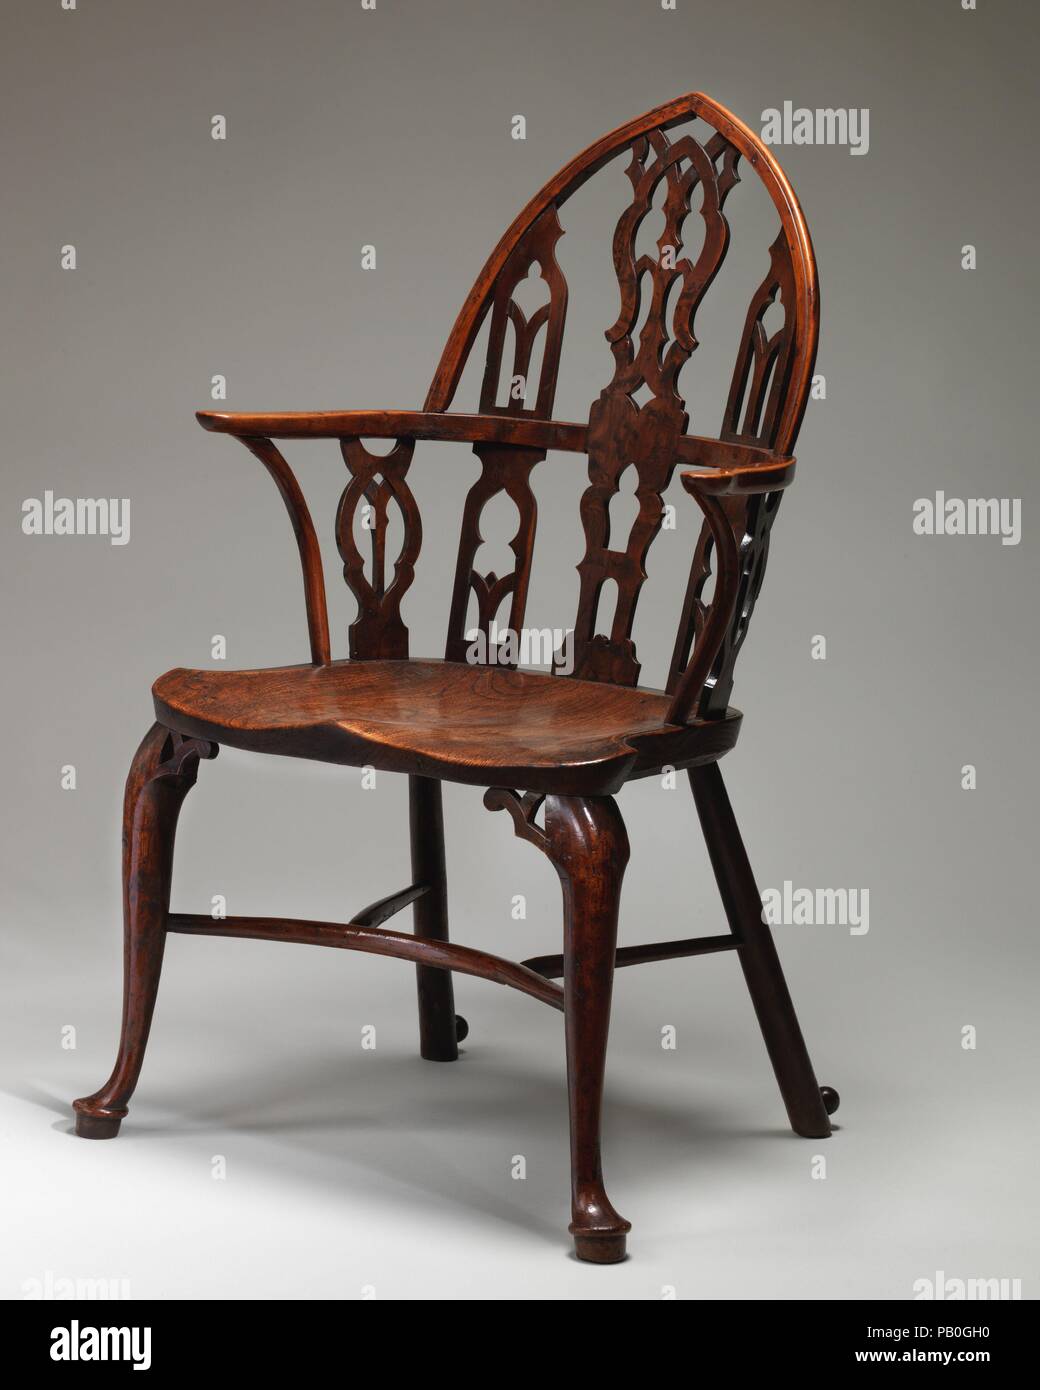 Gothic Windsor armchair (one of a pair). Culture: British, Thames Valley. Dimensions: Overall (confirmed): 41 3/4 × 23 × 22 in. (106 × 58.4 × 55.9 cm);  Height of seat: 18 1/4 in. (46.4 cm);  Width of seat: 22 in. (55.9 cm). Date: ca. 1760s.  Quintessentially English country furniture, this pair of Windsor armchairs (see also 2016.250) is a variant of the more traditional bow-back design. With its pointed arch-shaped back and openwork splats displaying Gothic tracery, these chairs beautifully reflect the Gothic taste which became fashionable in England in the middle of the 18th century. Museum Stock Photo